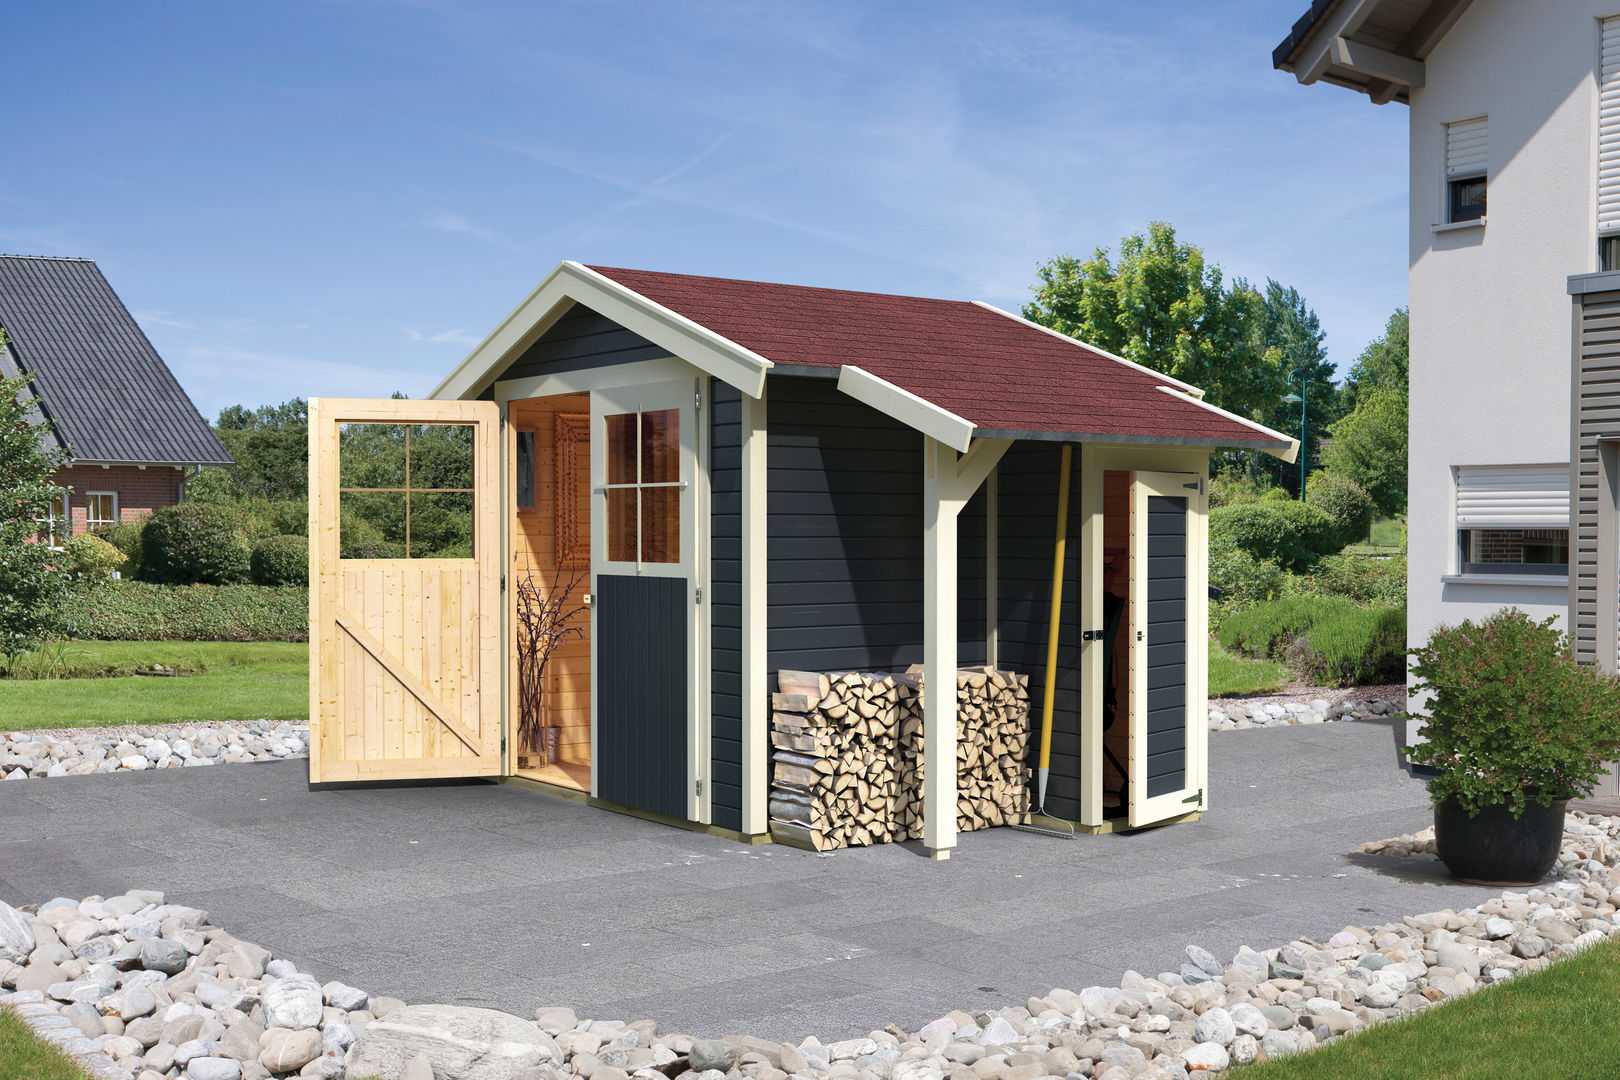 7 stylish garden outbuildings to consider | homify